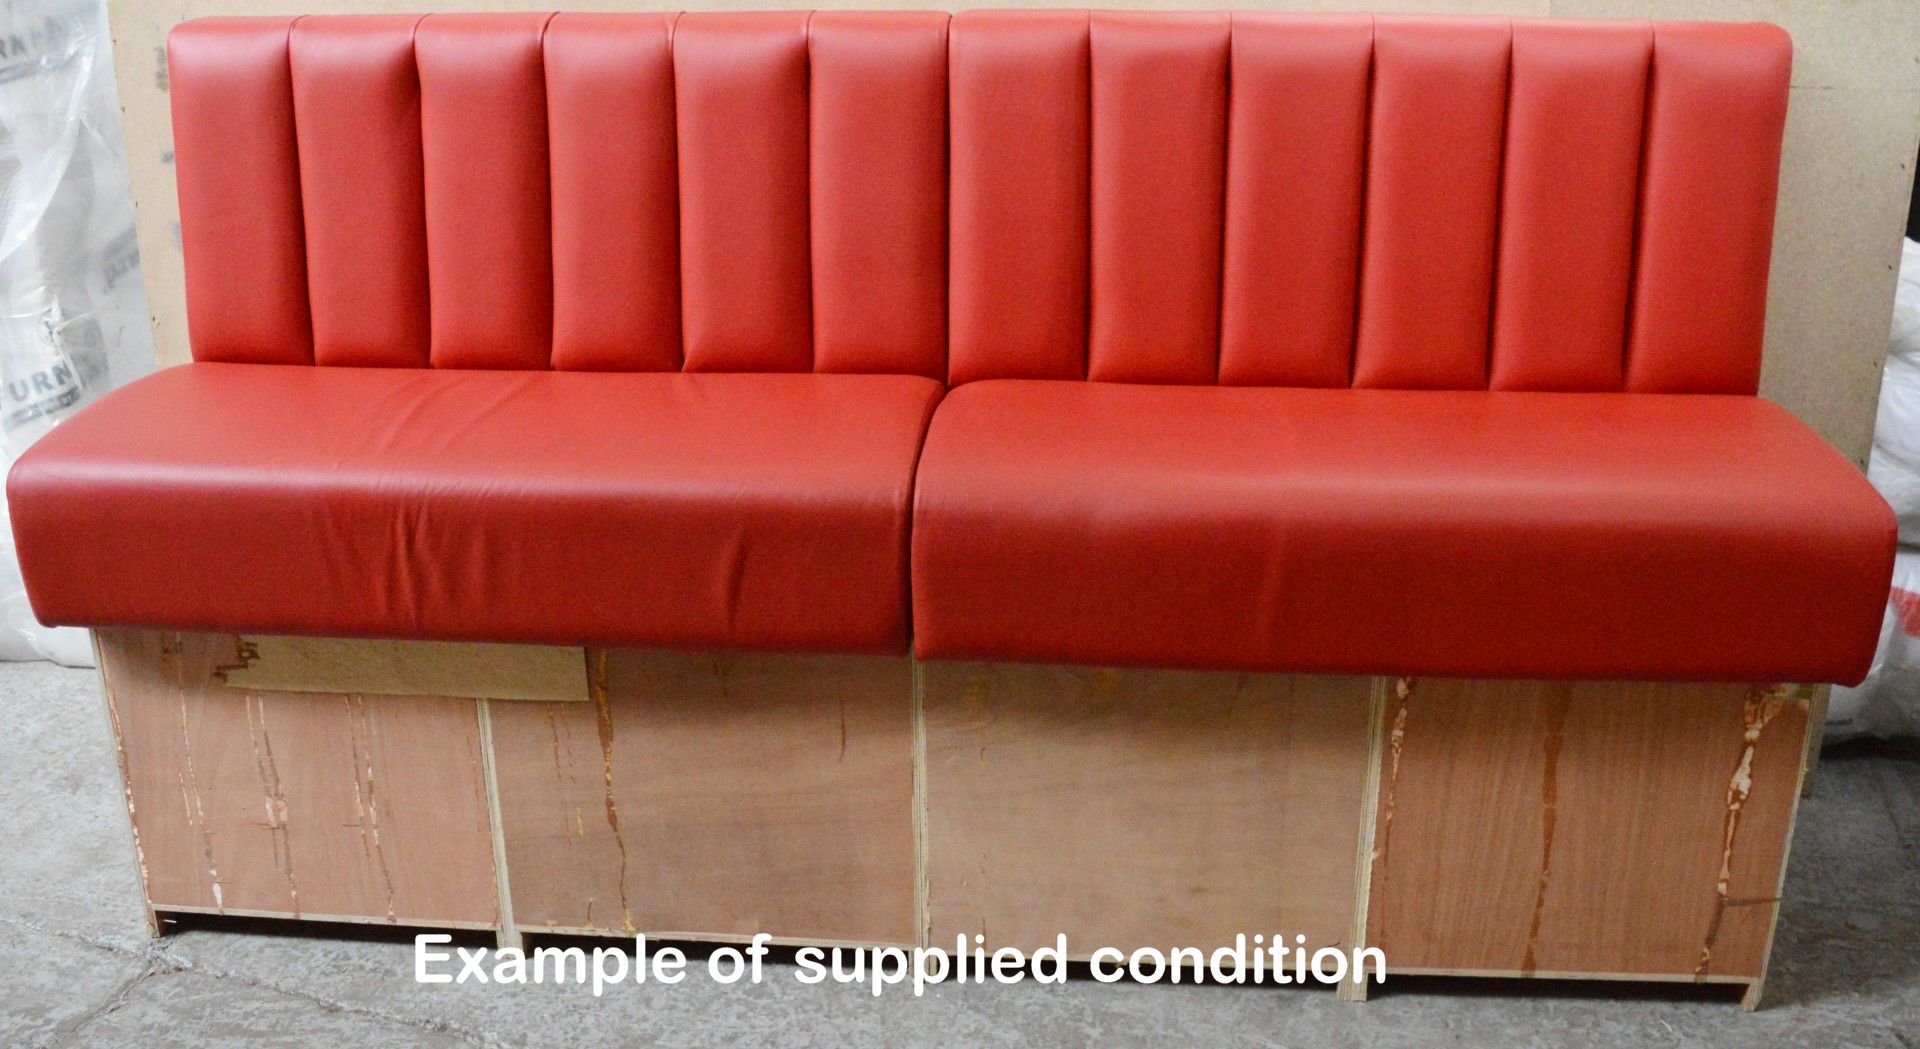 1 x Contemporary Seating Booth Upholstered In A Bright Red Leather - CL353 - Image 3 of 7